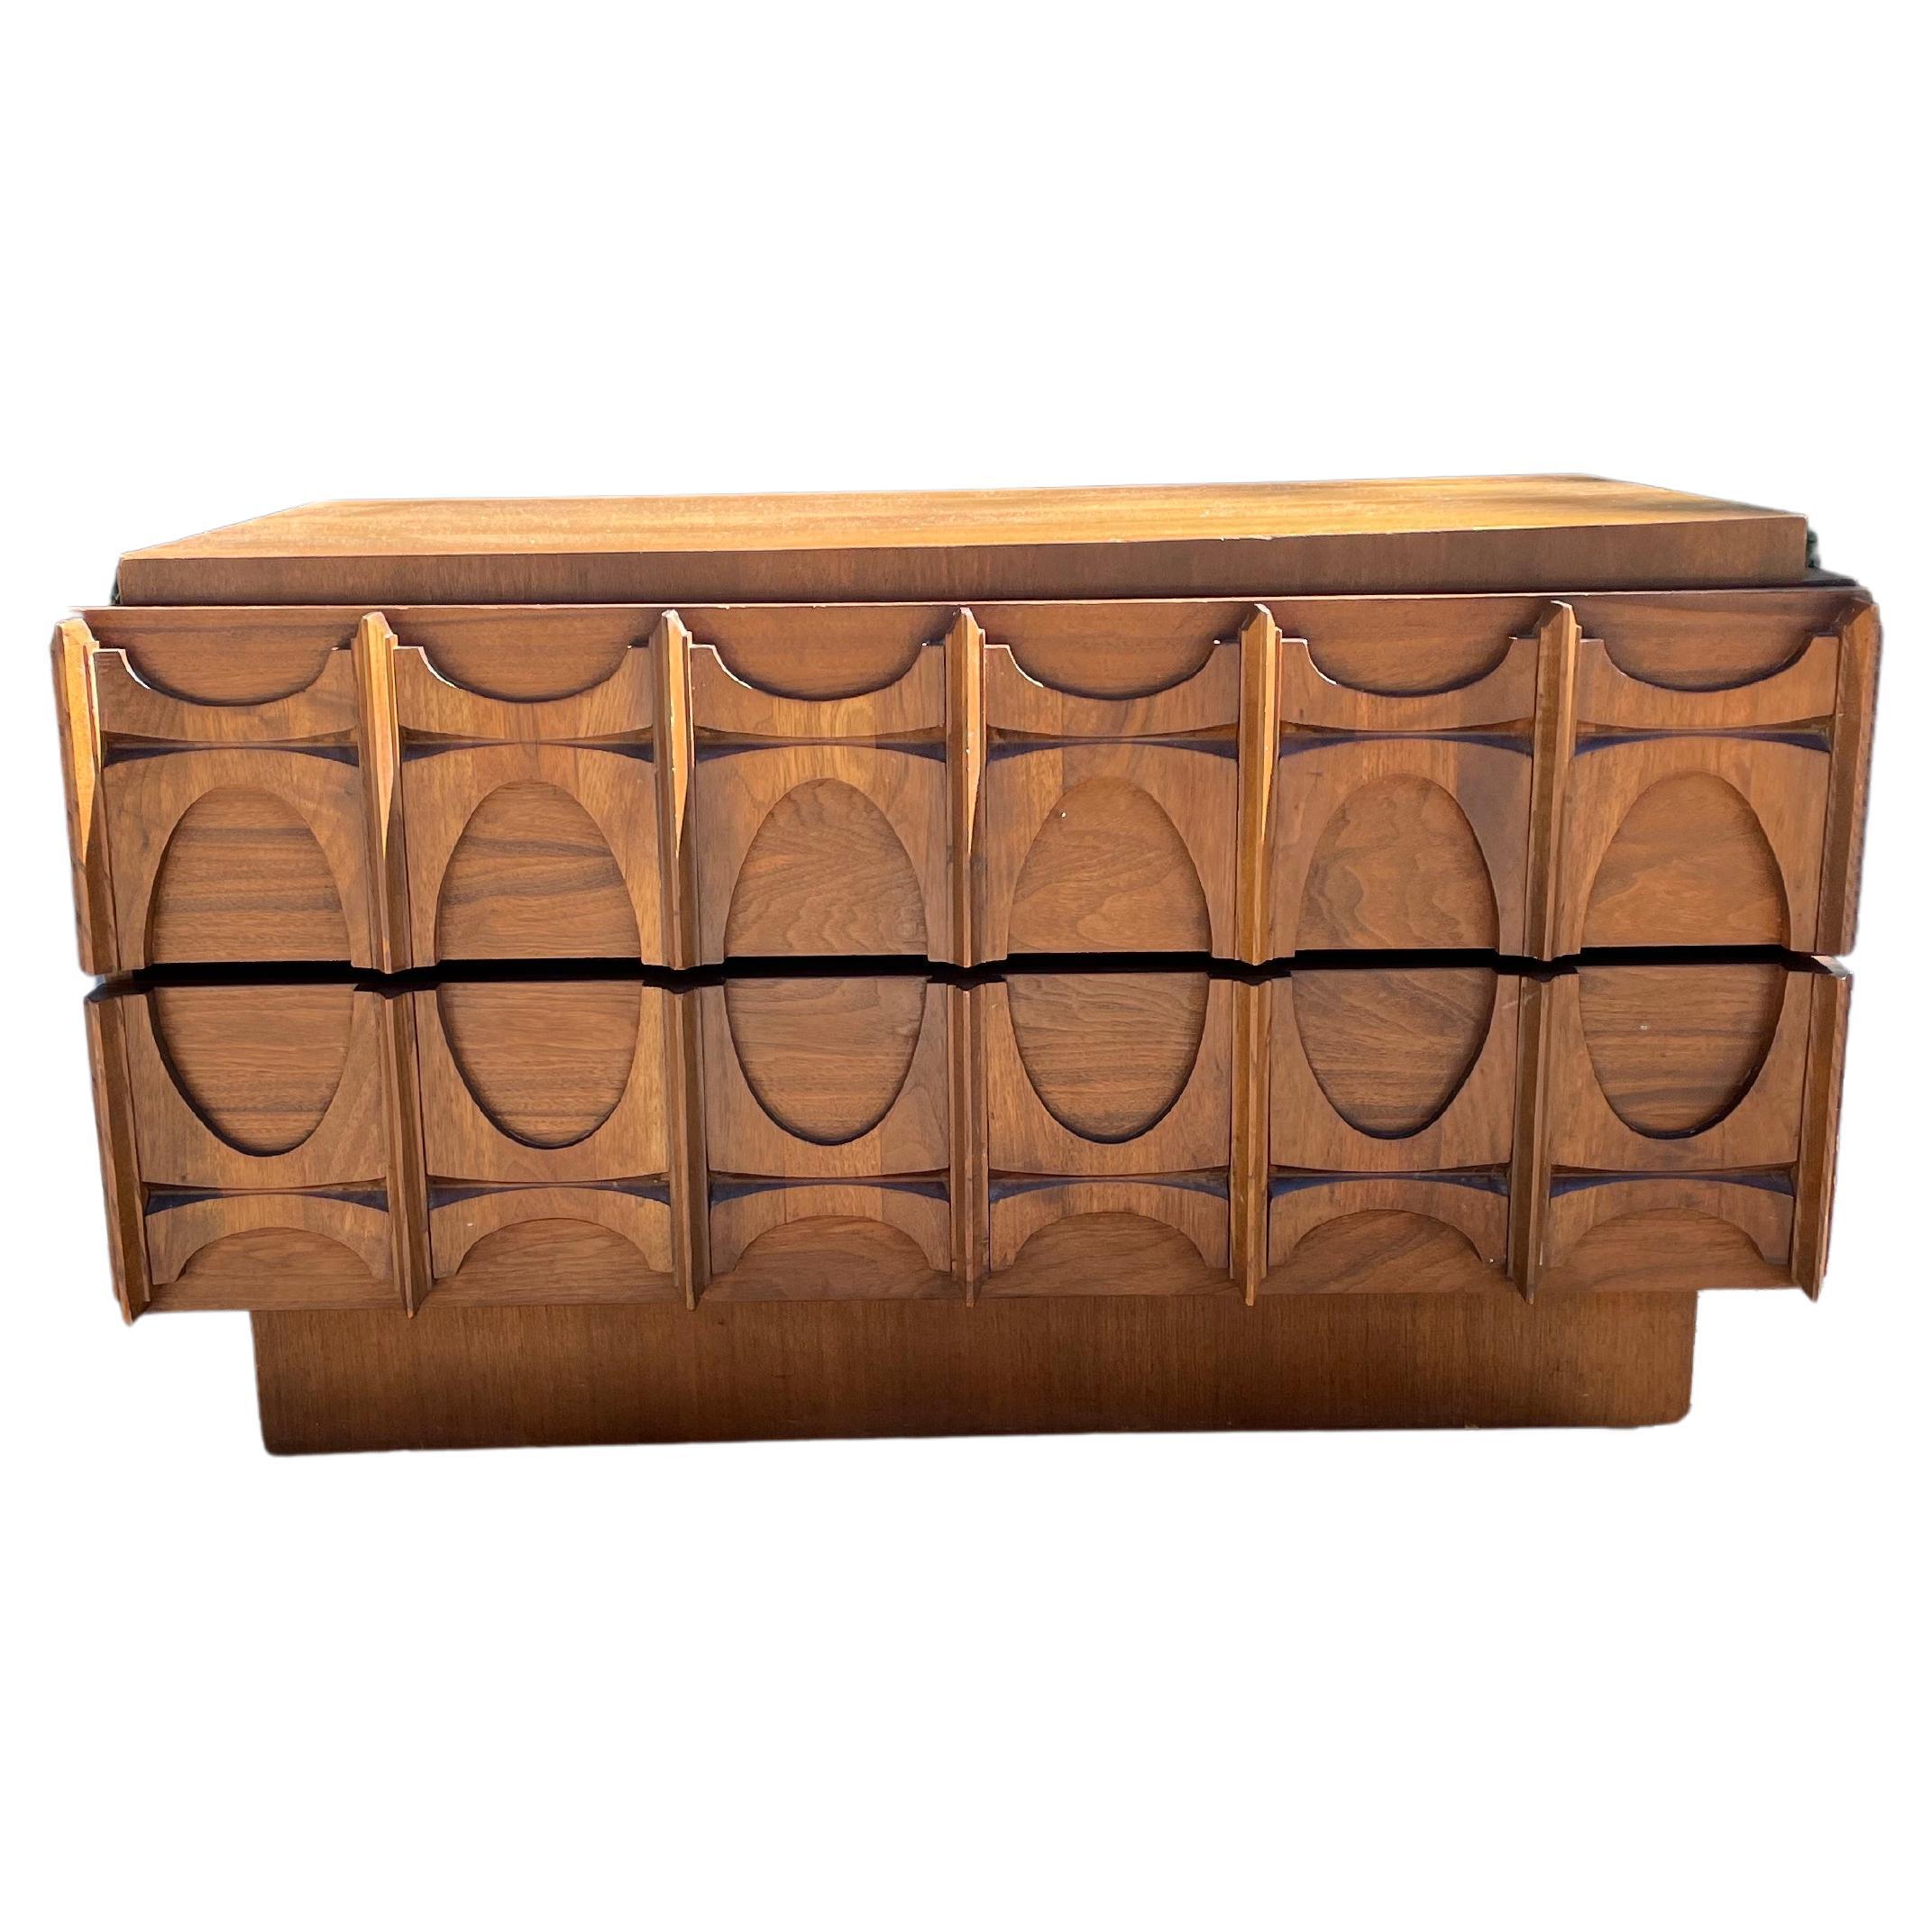 Paul Evans style brutalist credenza chest by Tobago, Circa 1970s. Two carved walnut drawers with gorgeous lines.

Picture this credenza paired with a Lou Hodges Desk and a Michel Ducaroy Marsala leather lounge chair for Ligne Roset.

Dimensions: